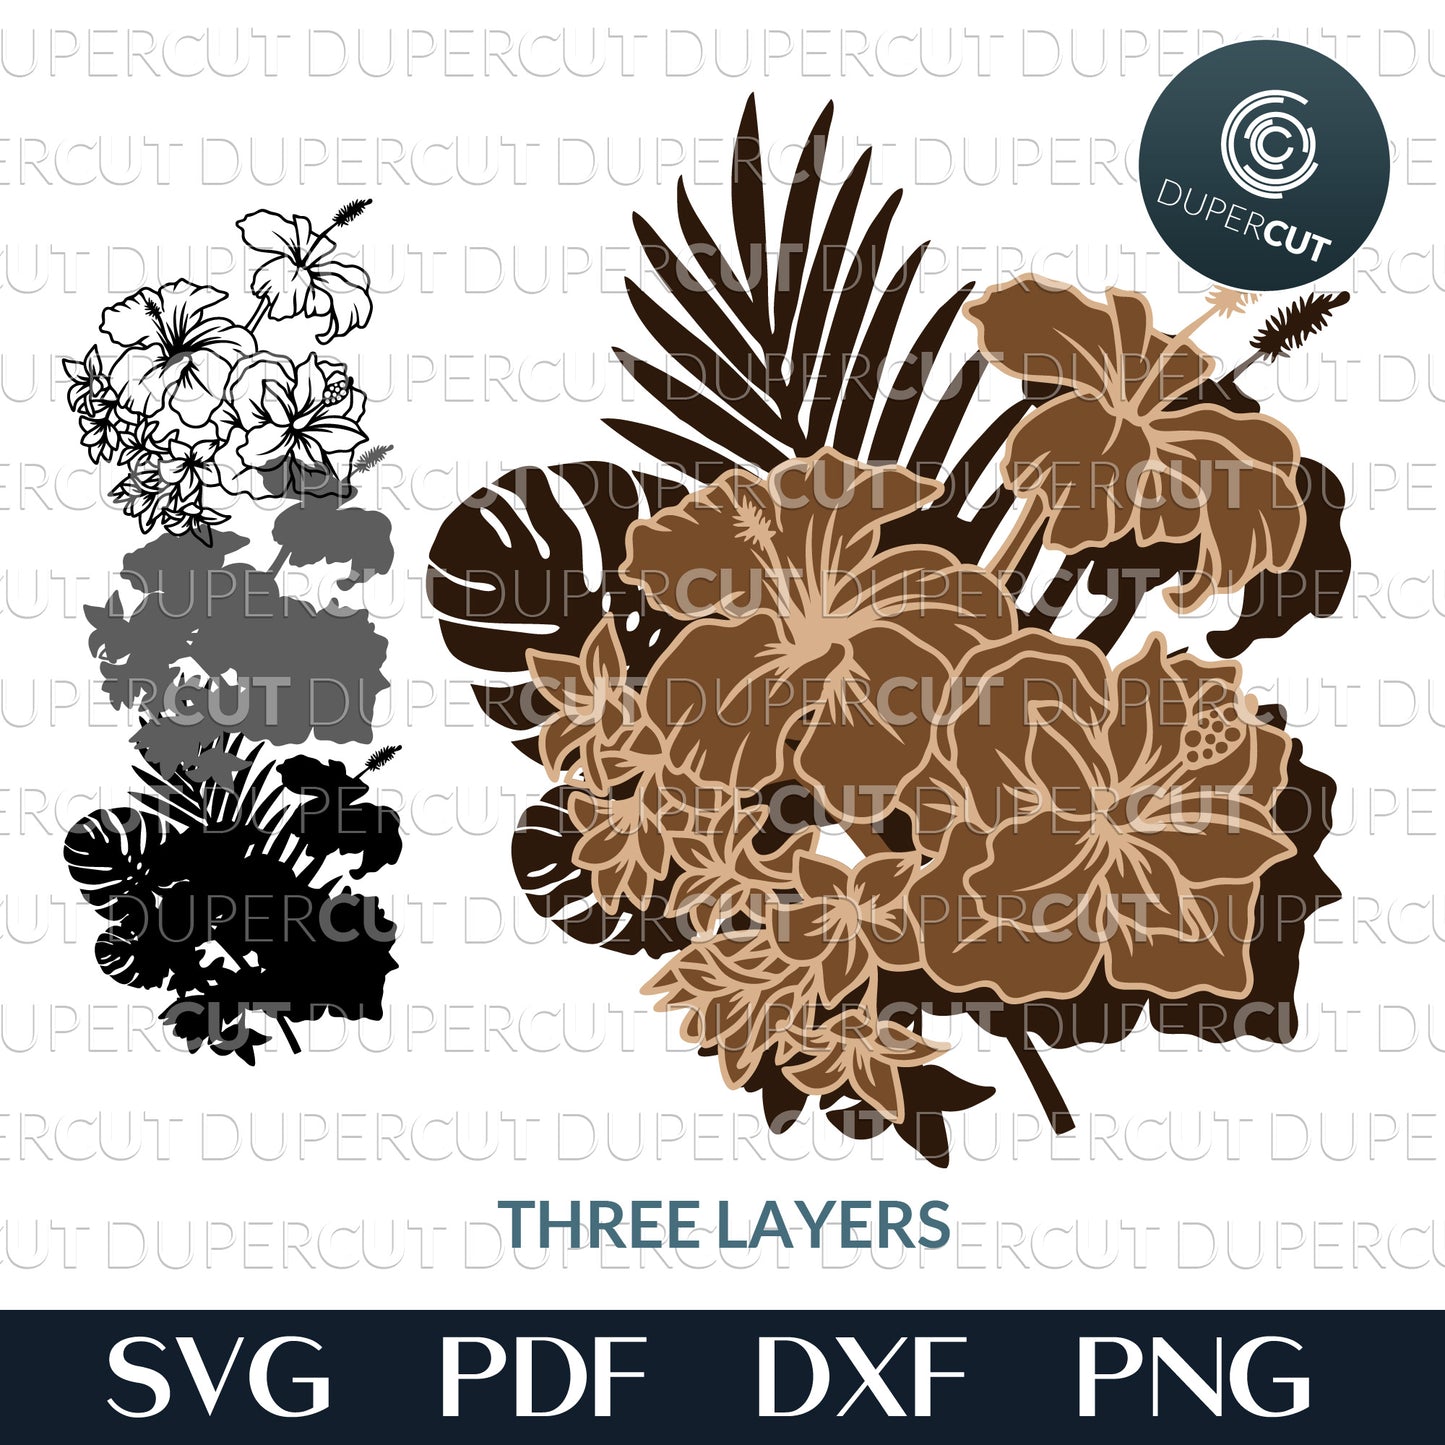 Tropical floral bouquet - layered cut files - SVG PDF DXF vector template for Glowforge, laser cutting machines, engraving, Cricut, Silhouette cameo by DuperCut